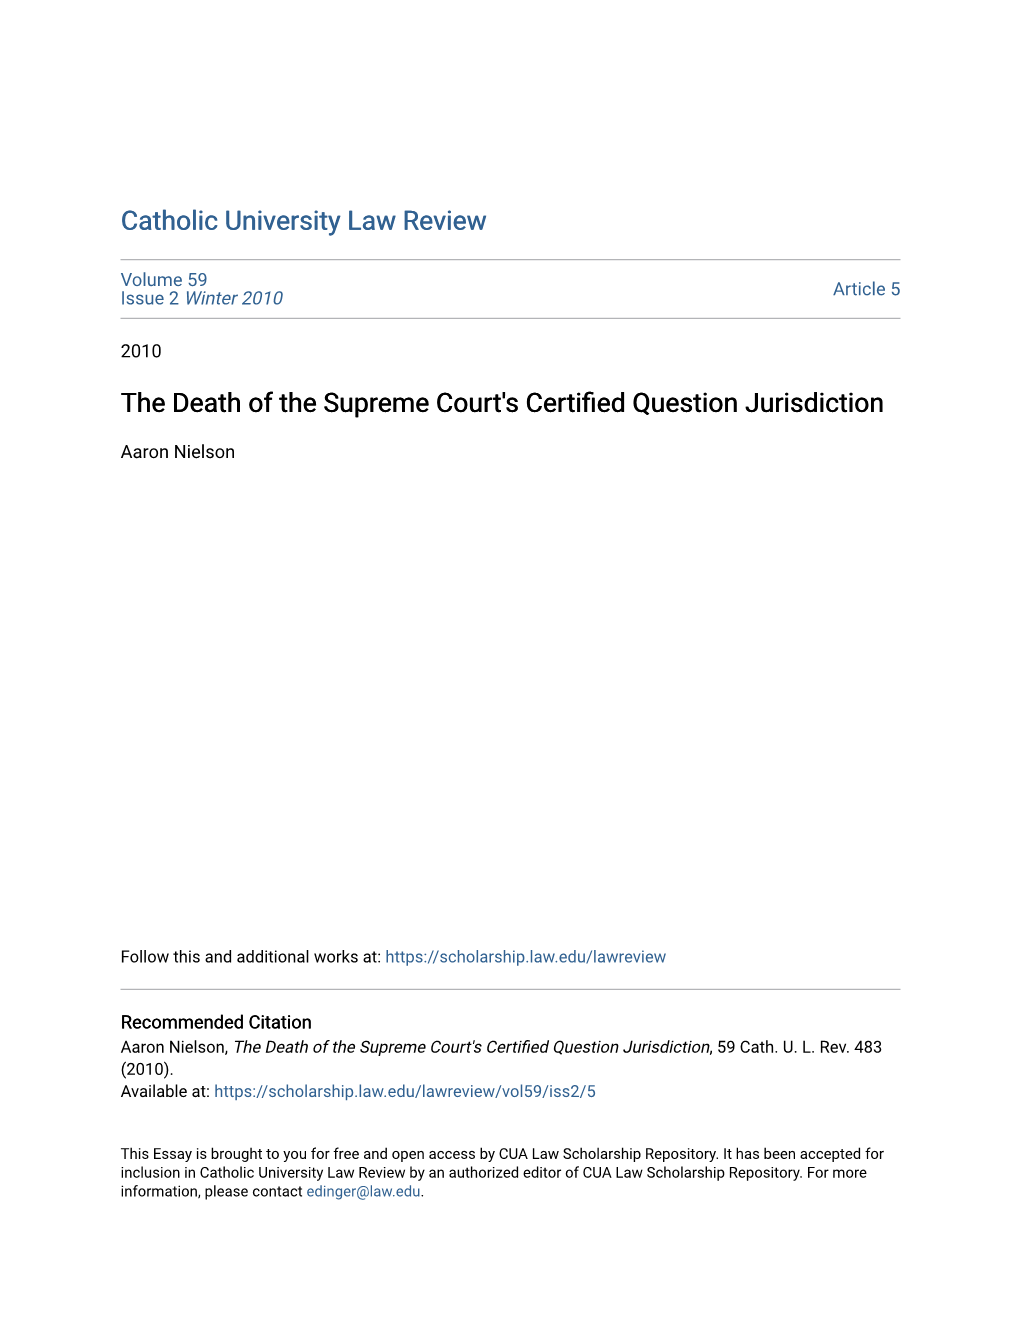 The Death of the Supreme Court's Certified Question Jurisdiction